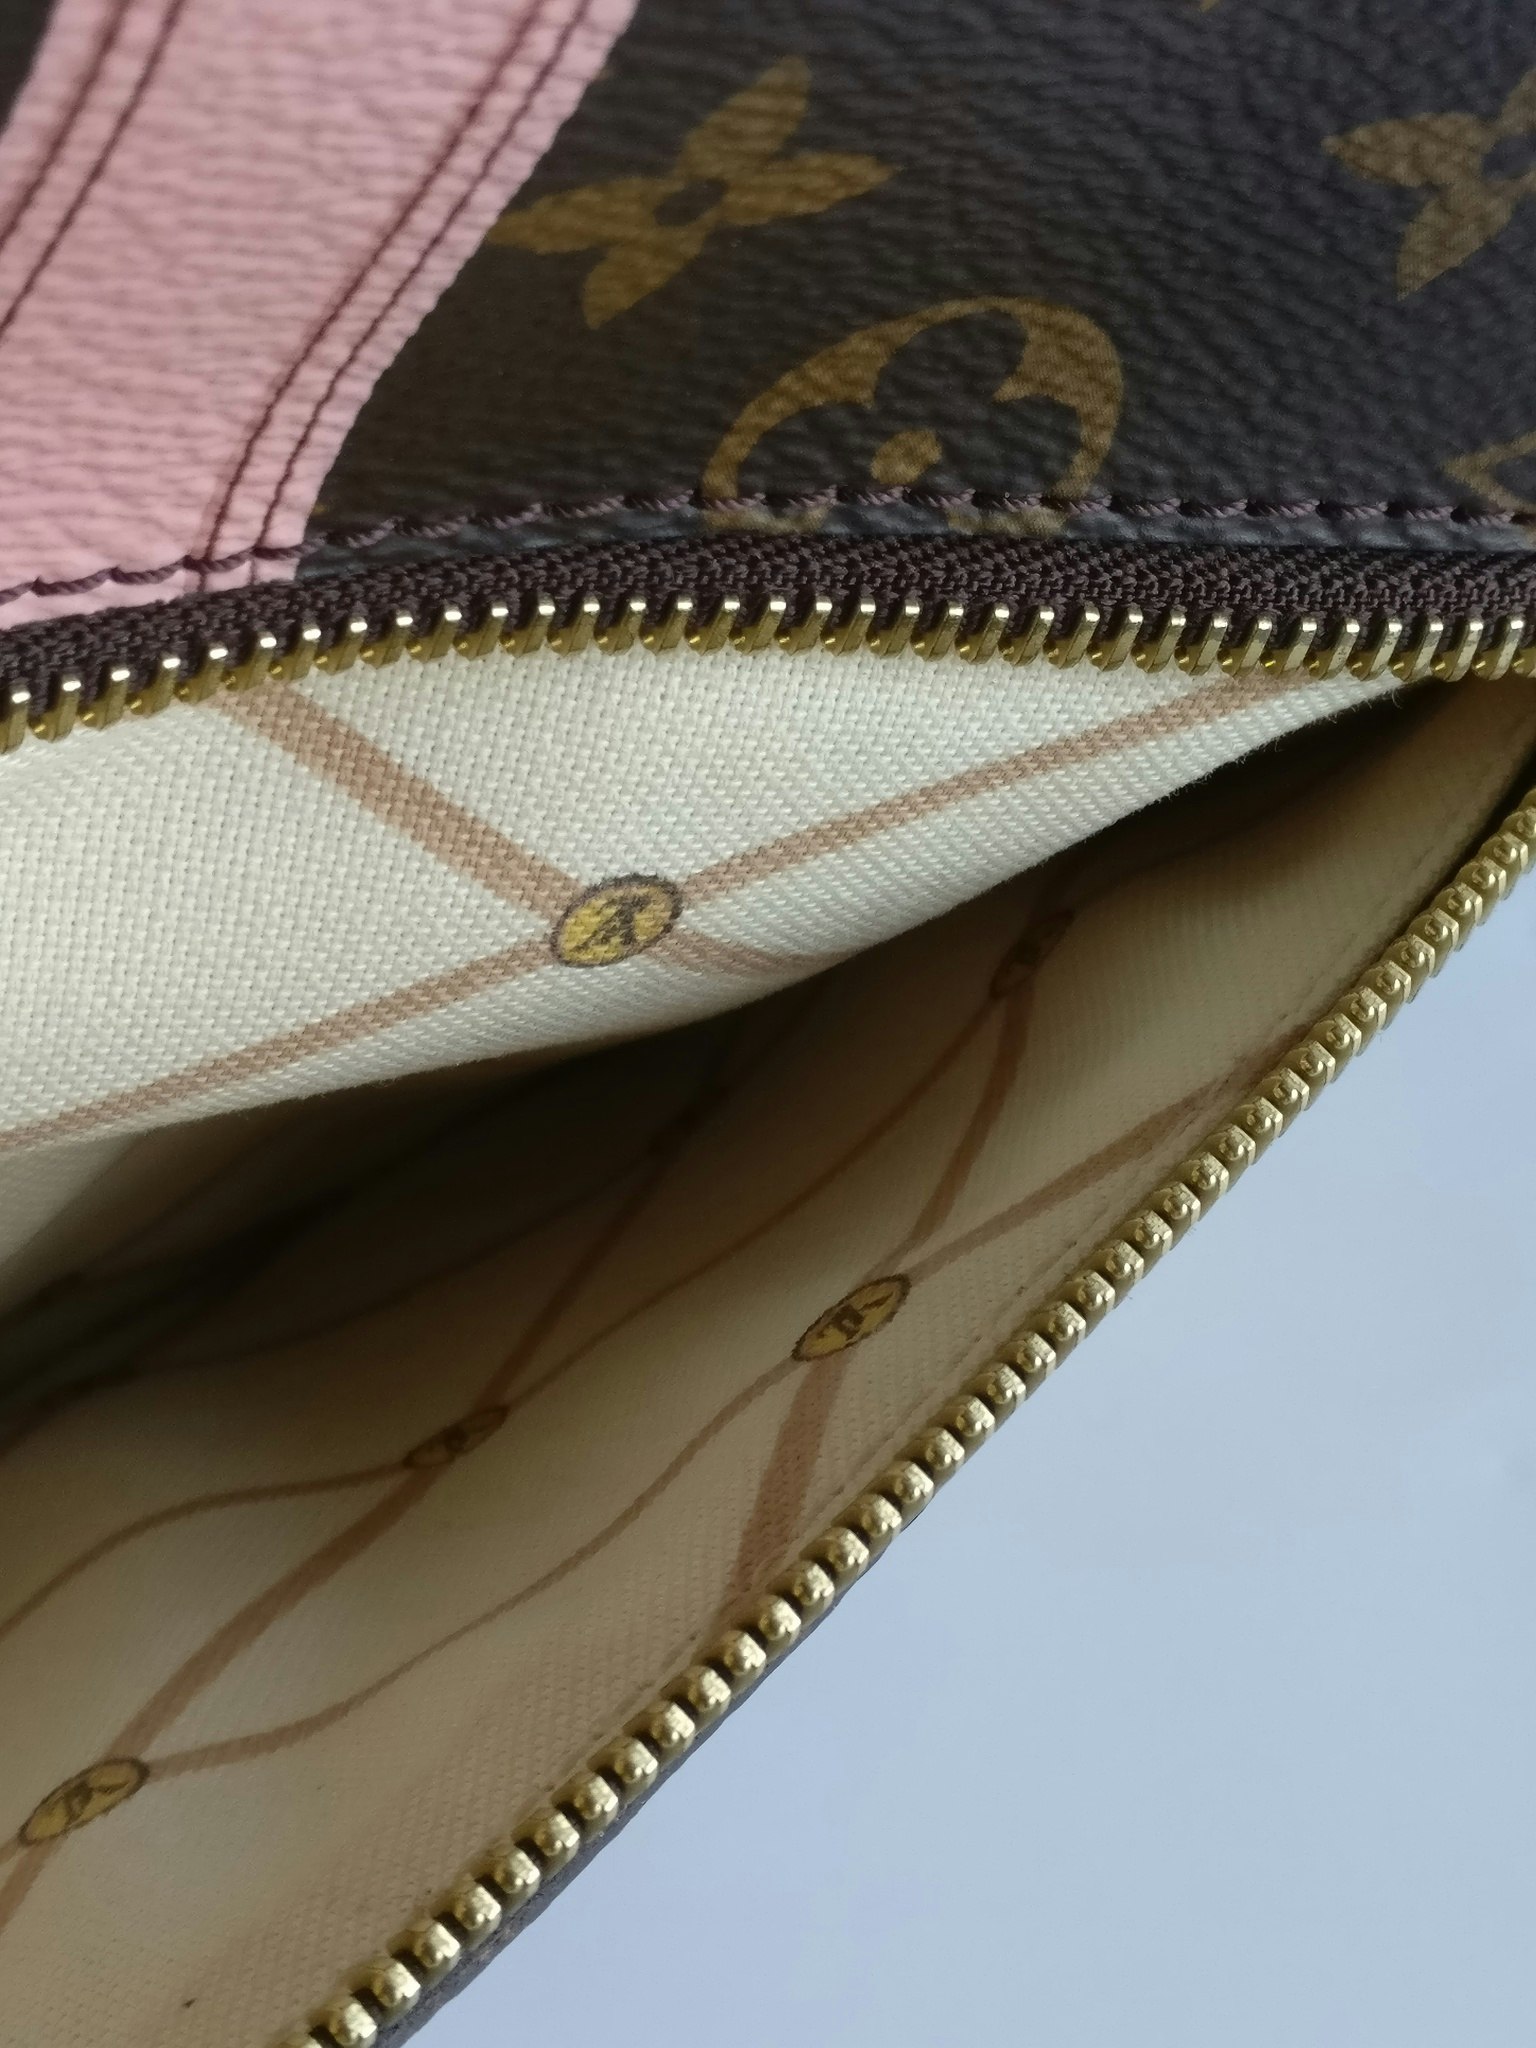 LOUIS VUITTON Monogram LIMITED EDITION Summer Trunks Toiletry